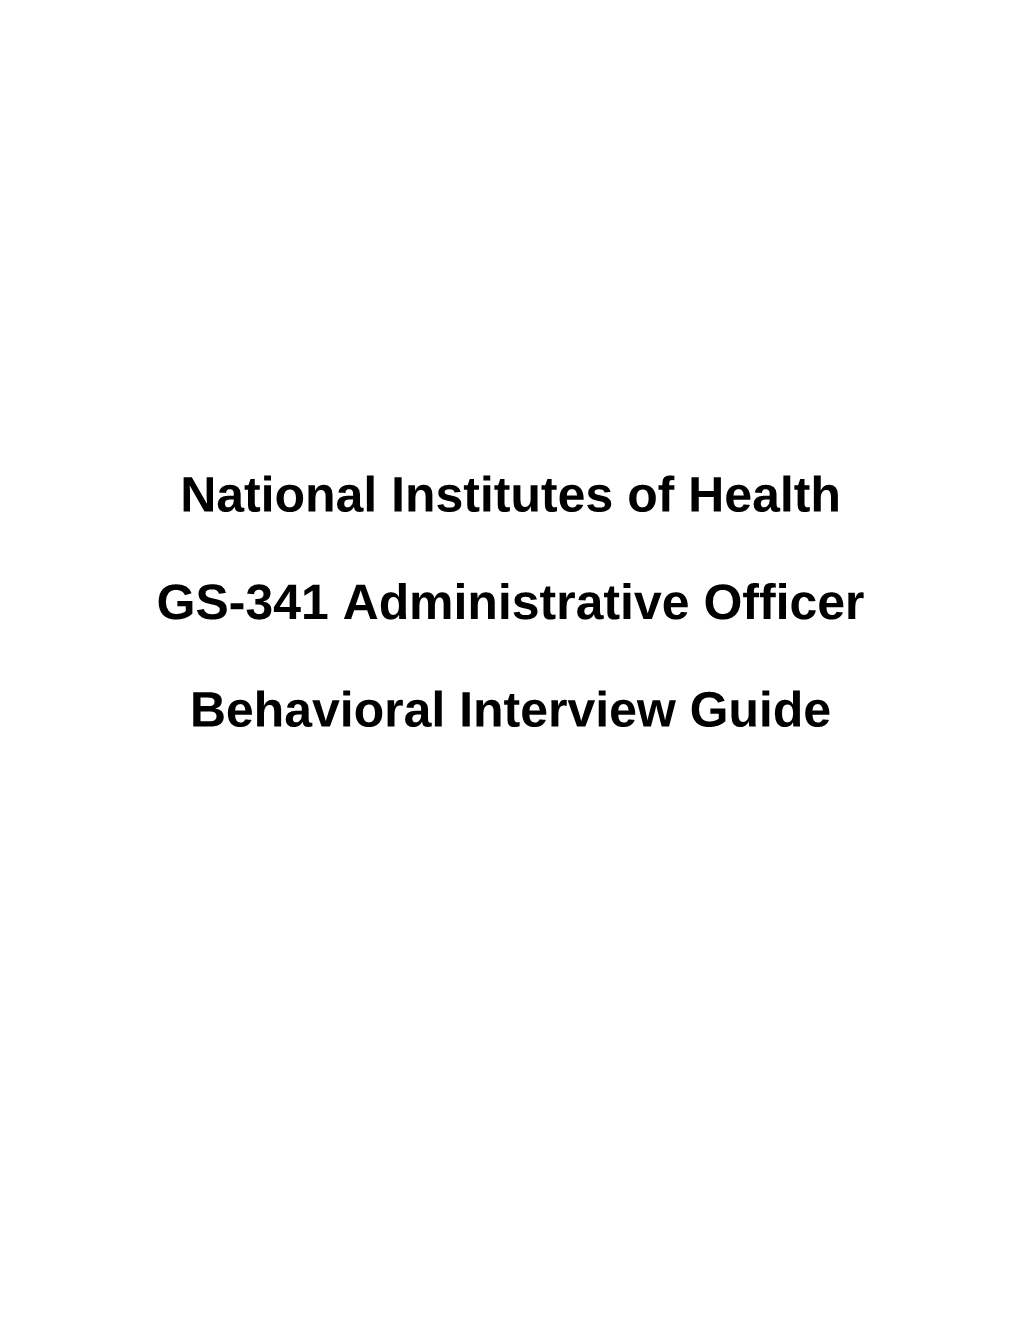 NIH Behavioral Interview Guide GS-341 Administrative Officer